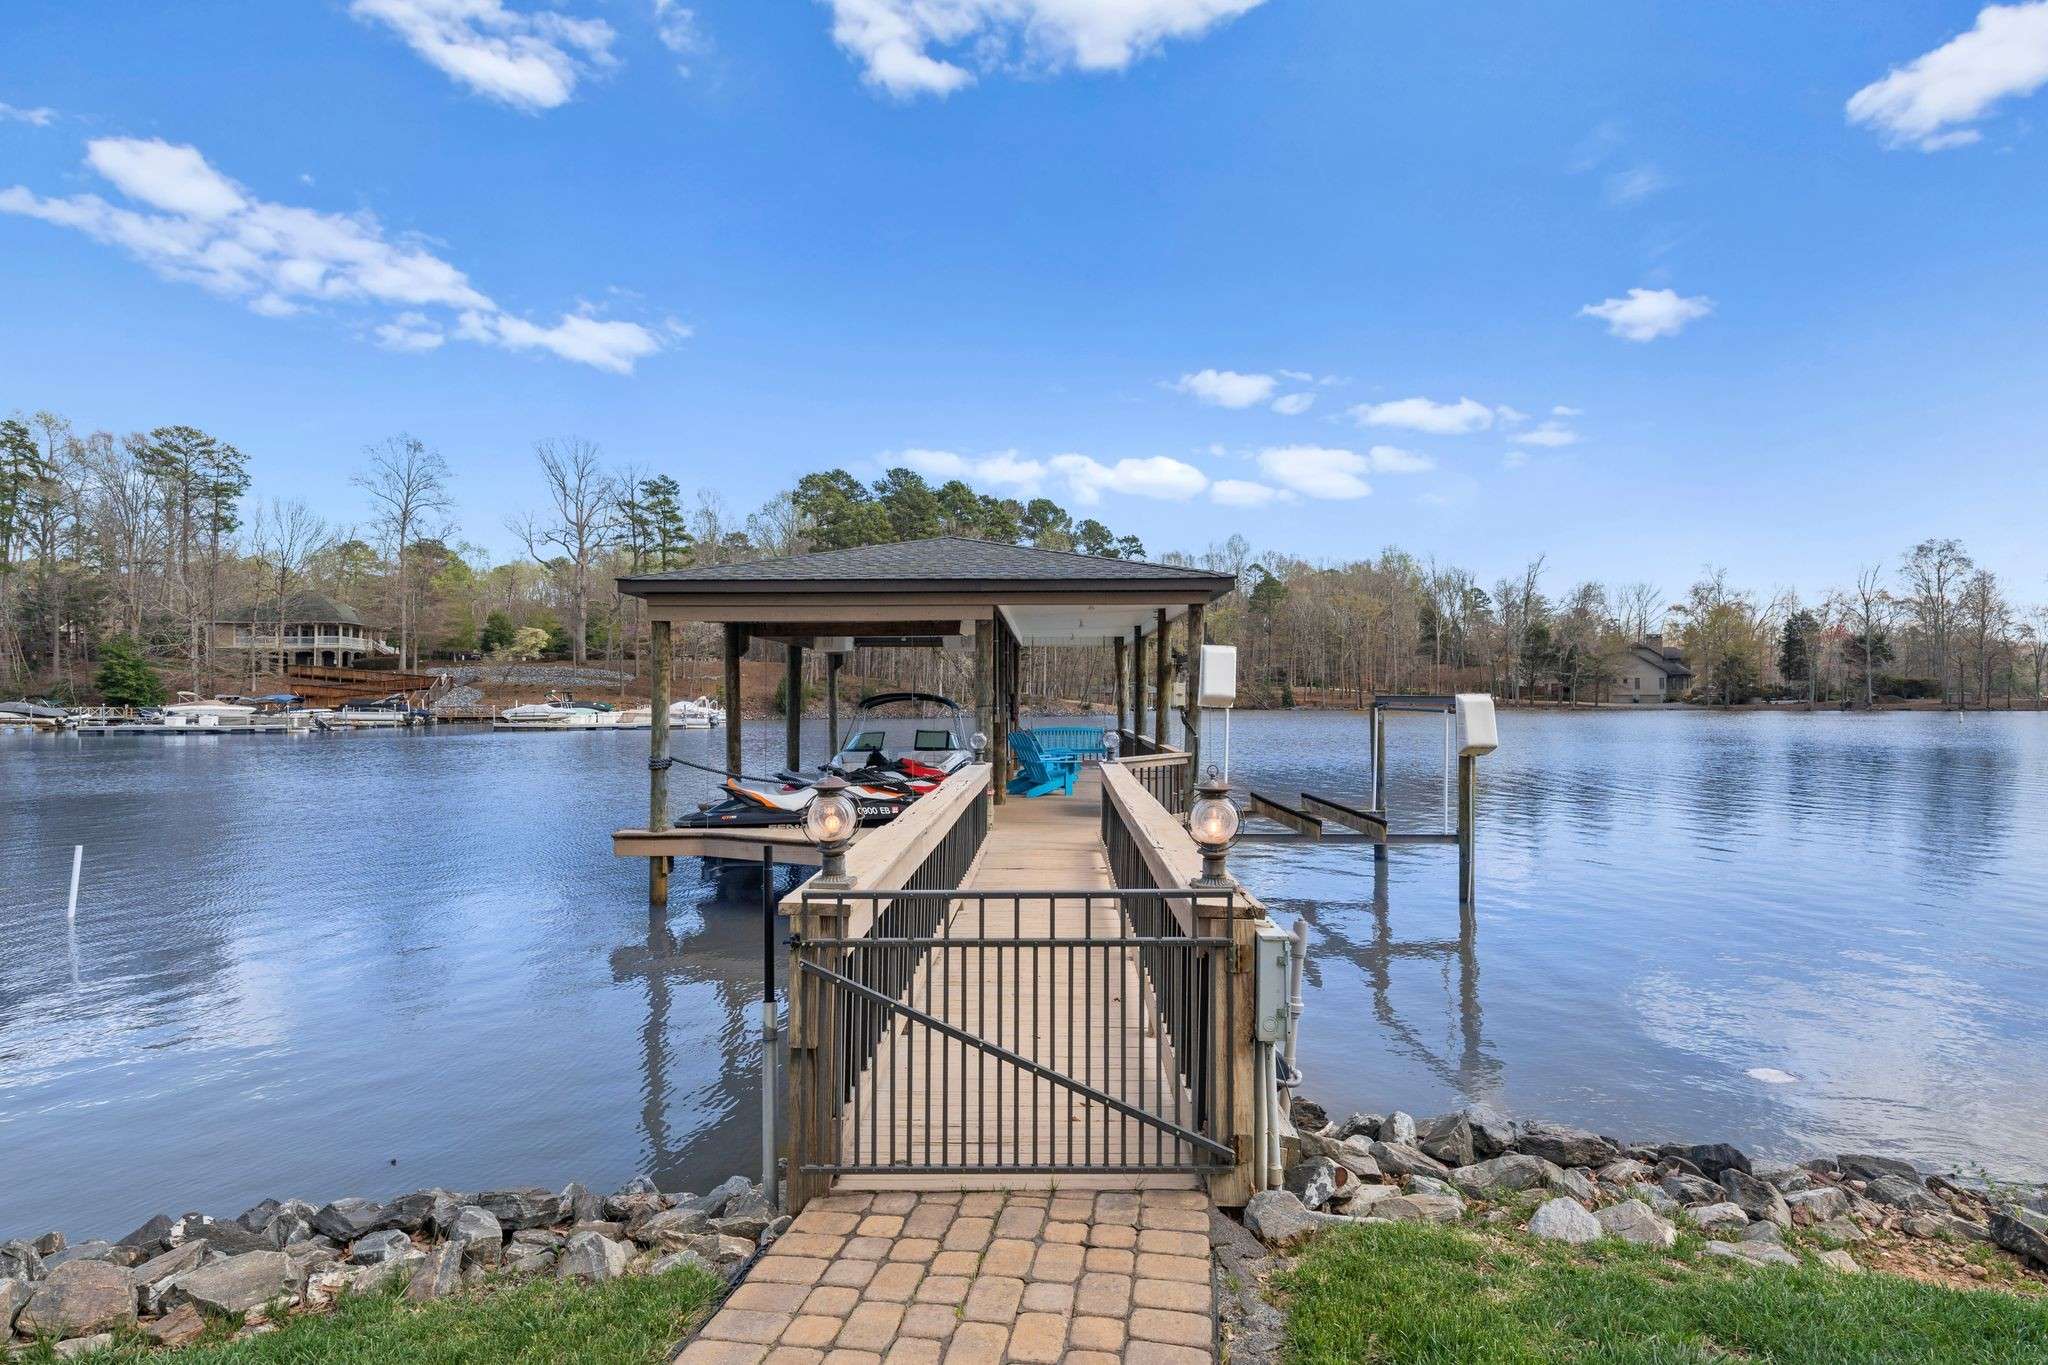 60 of 79. Exterior Day Time Photo - 846 Armstrong Rd - Showcasing Permanent Stick Built Dock.